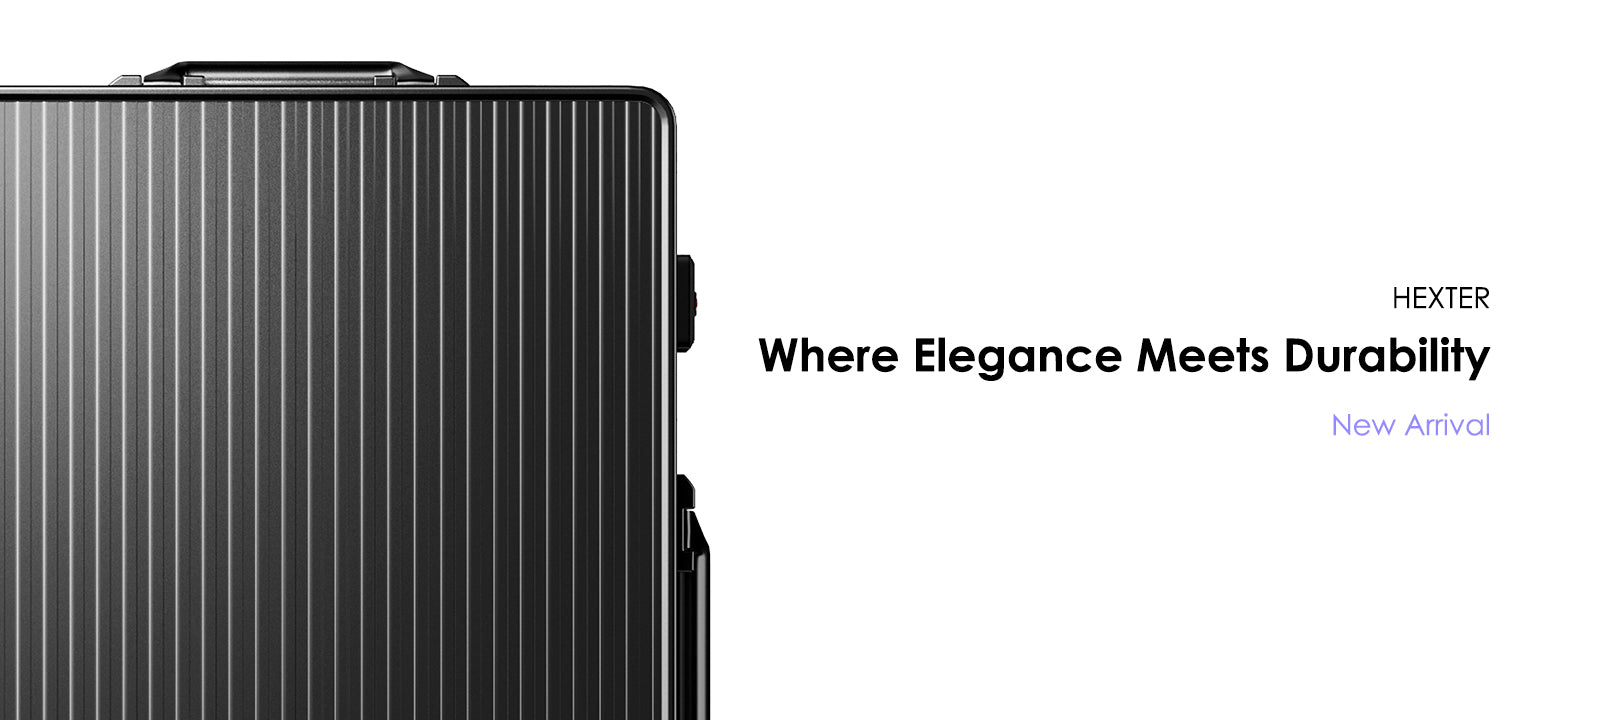 Promotional image featuring a black ribbed aluminium luggage standing upright on the left side of the frame. To the right, there's text in a modern font that reads "Where Elegance Meets Durability" above the word "HEXTER" in bold, followed by "New Arrival" in a smaller font. The background is white, emphasizing the suitcase and the text.